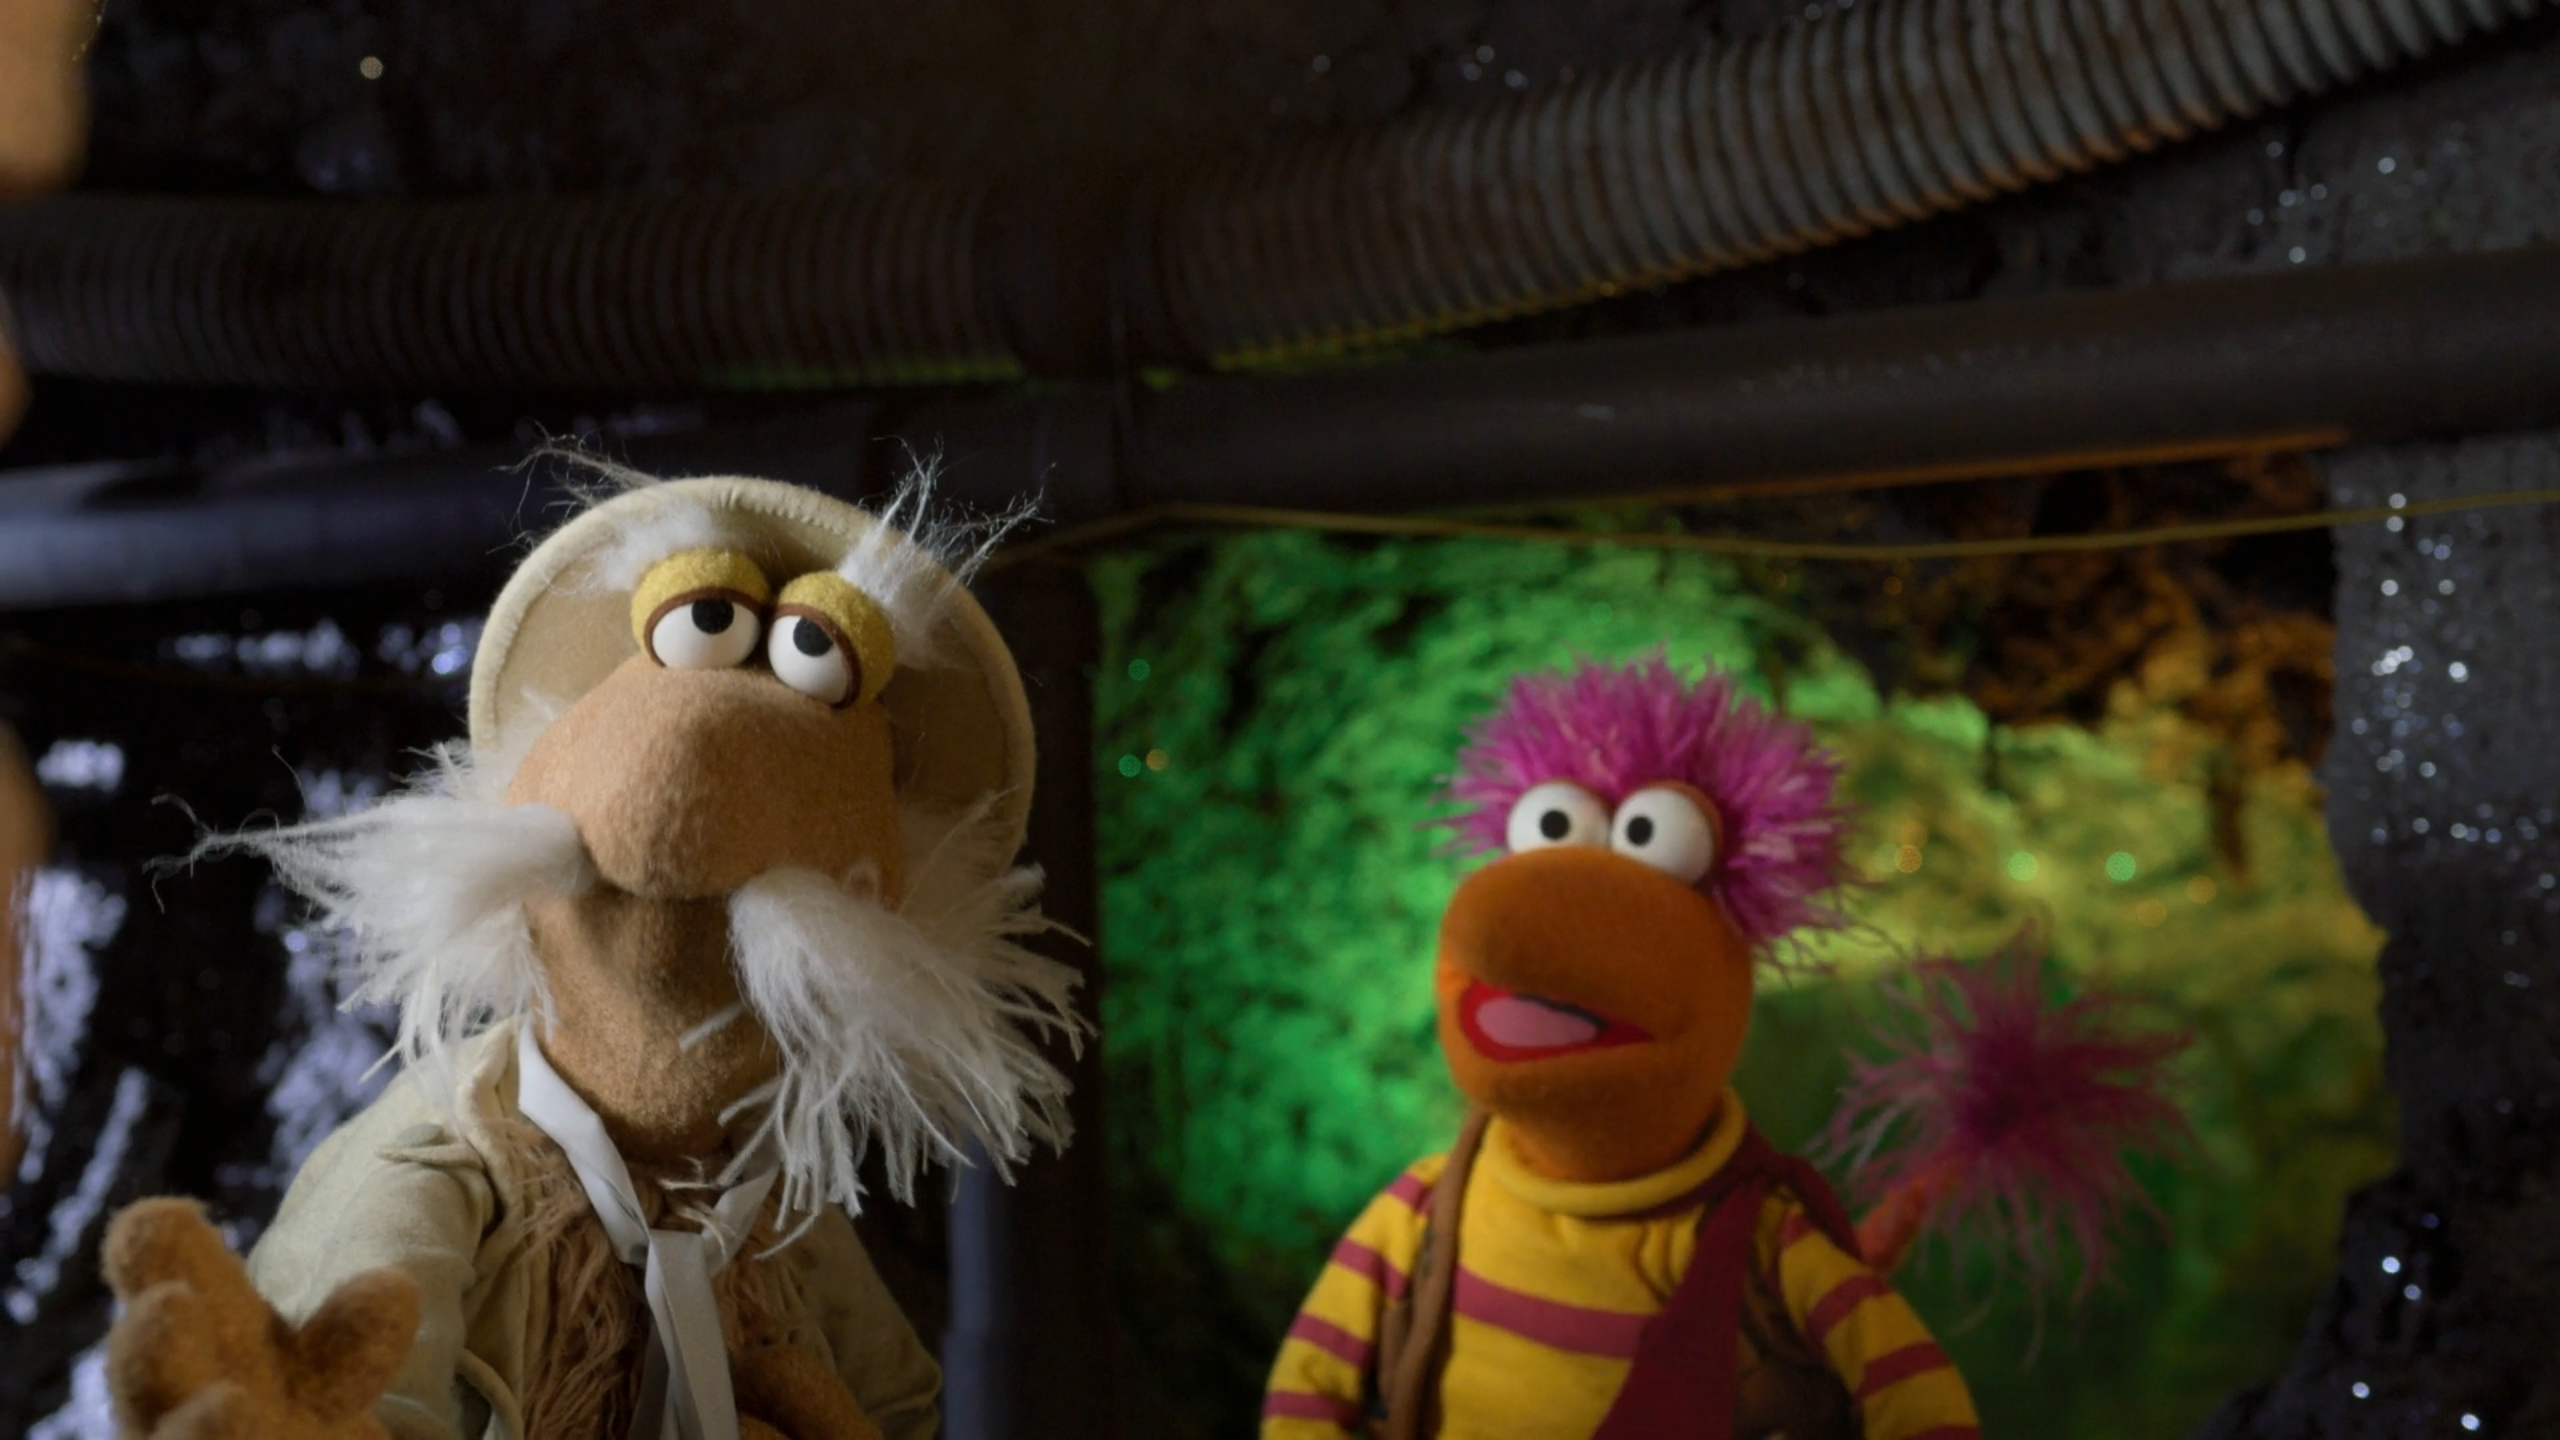 Review: Fraggle Rock on Apple TV+ is the Muppet series Disney+